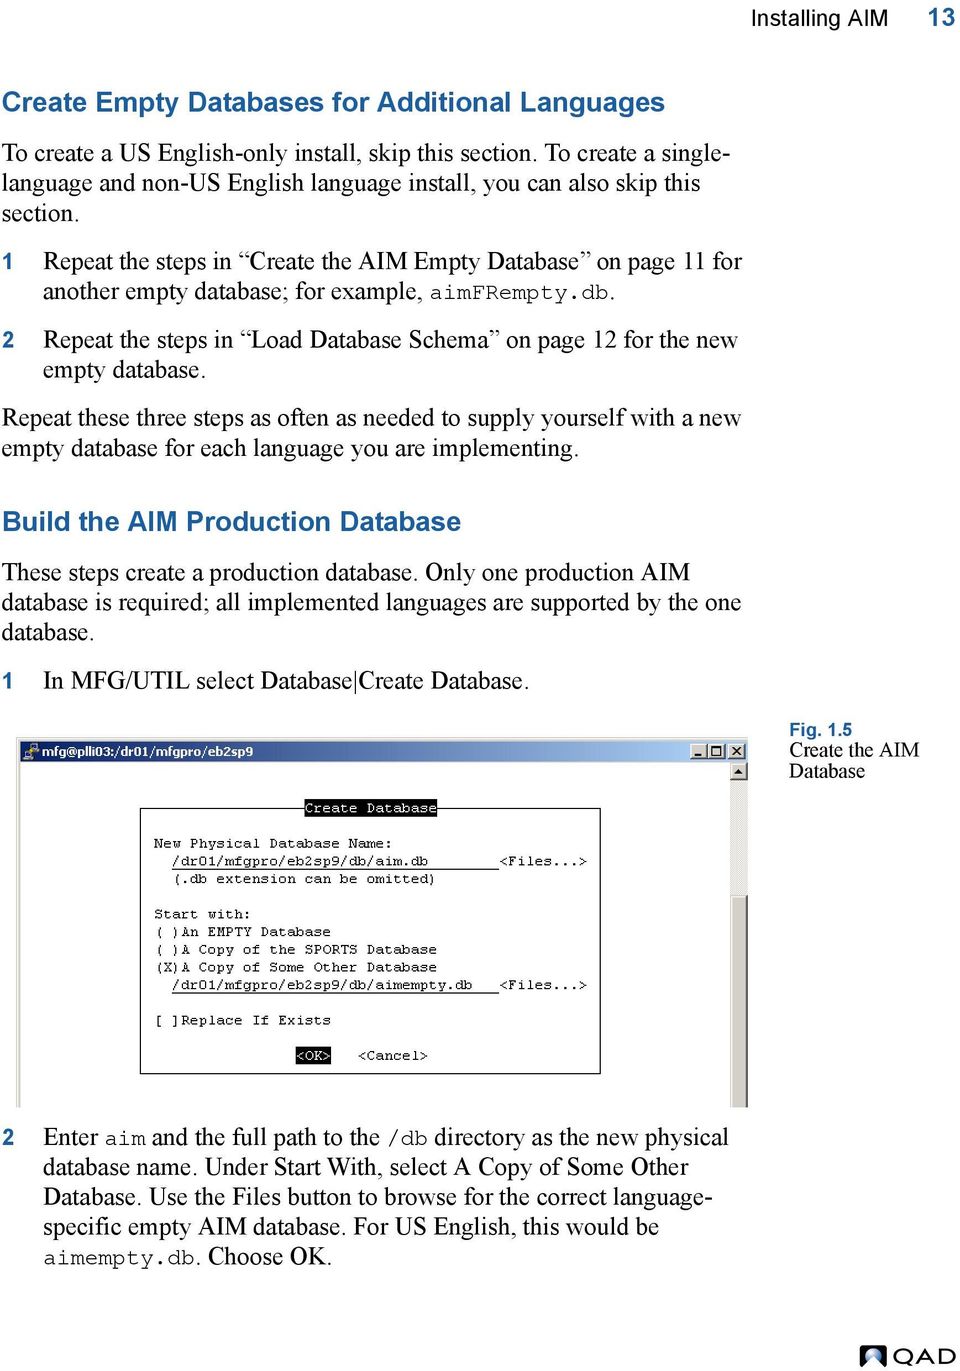 1 Repeat the steps in Create the AIM Empty Database on page 11 for another empty database; for example, aimfrempty.db. 2 Repeat the steps in Load Database Schema on page 12 for the new empty database.